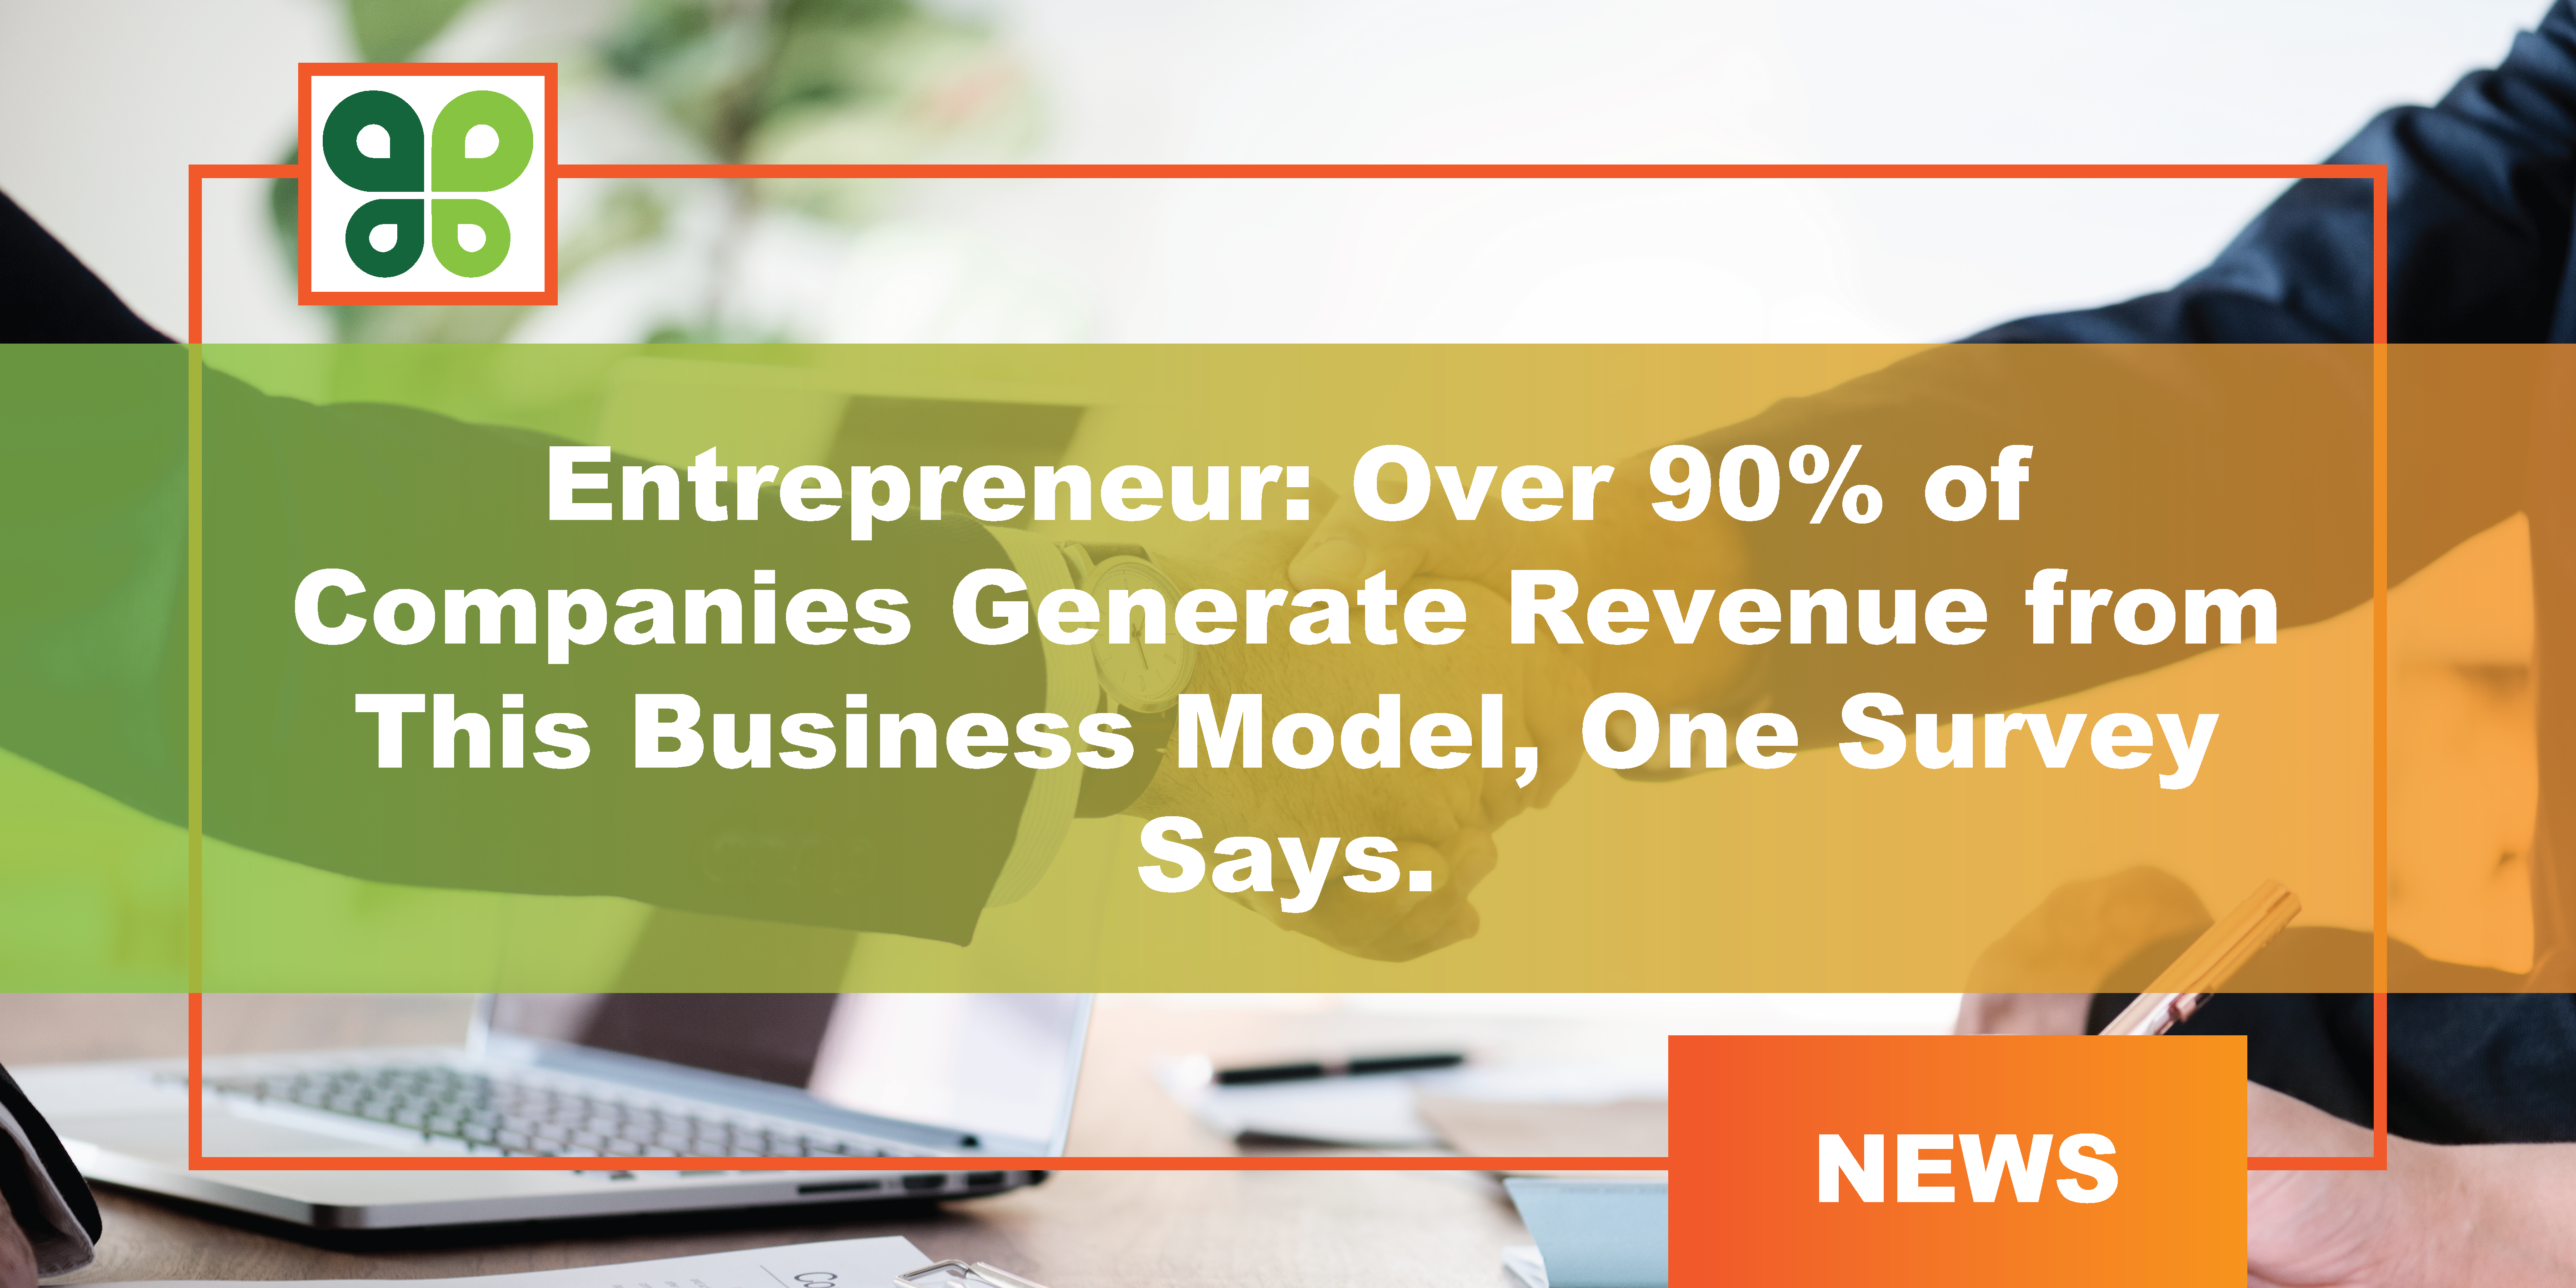 Entrepreneur: Over 90% of Companies Generate Revenue from This Business Model, One Survey Says.